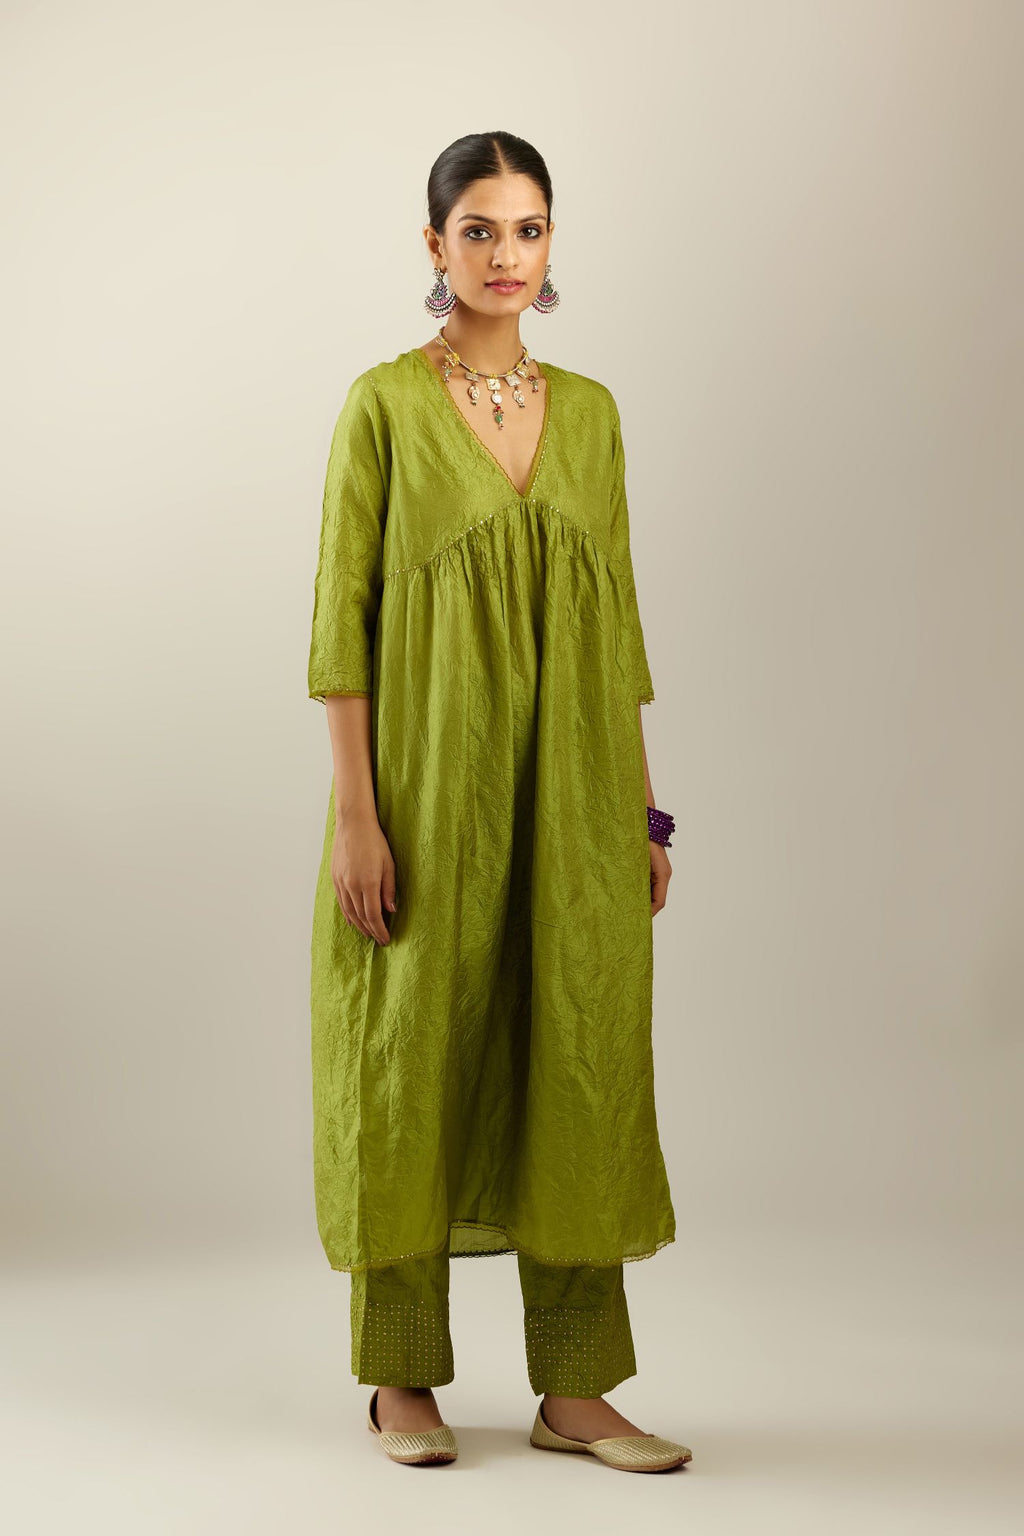 Apple green silk hand crushed V neck gathered kurta set, highlighted with gold sequins and embroidered scalloped organza at edges.